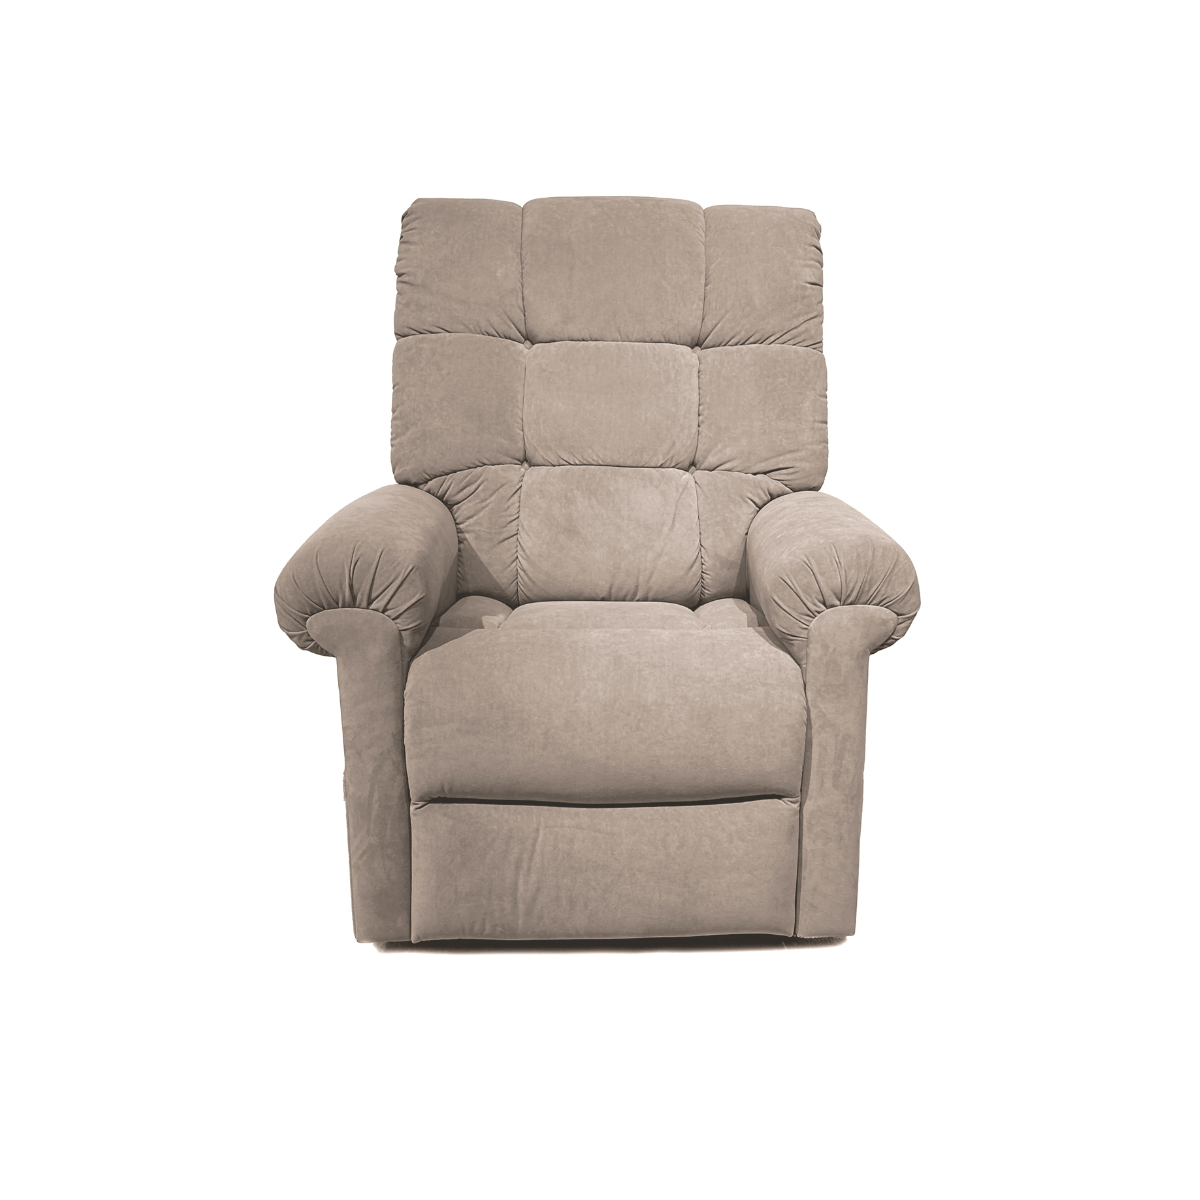 Tan Journey Sleep Chair sitting in upright position facing forward with padded armrests and ample cushioning